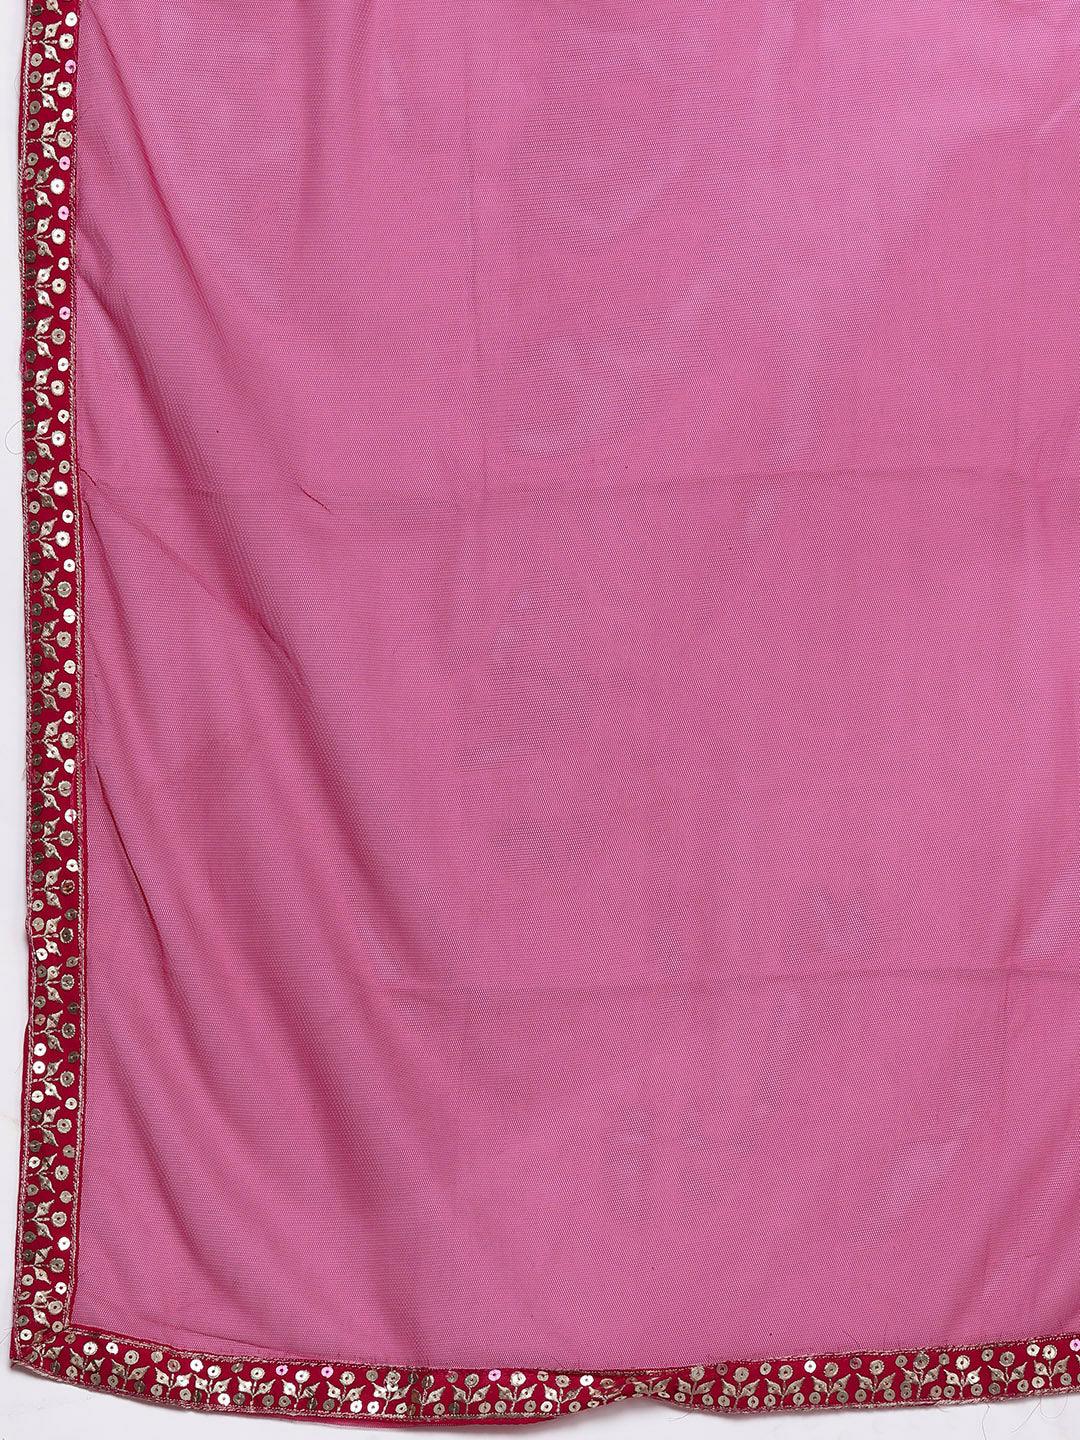 Pink Embroidered Georgette Anarkali Suit With Dupatta